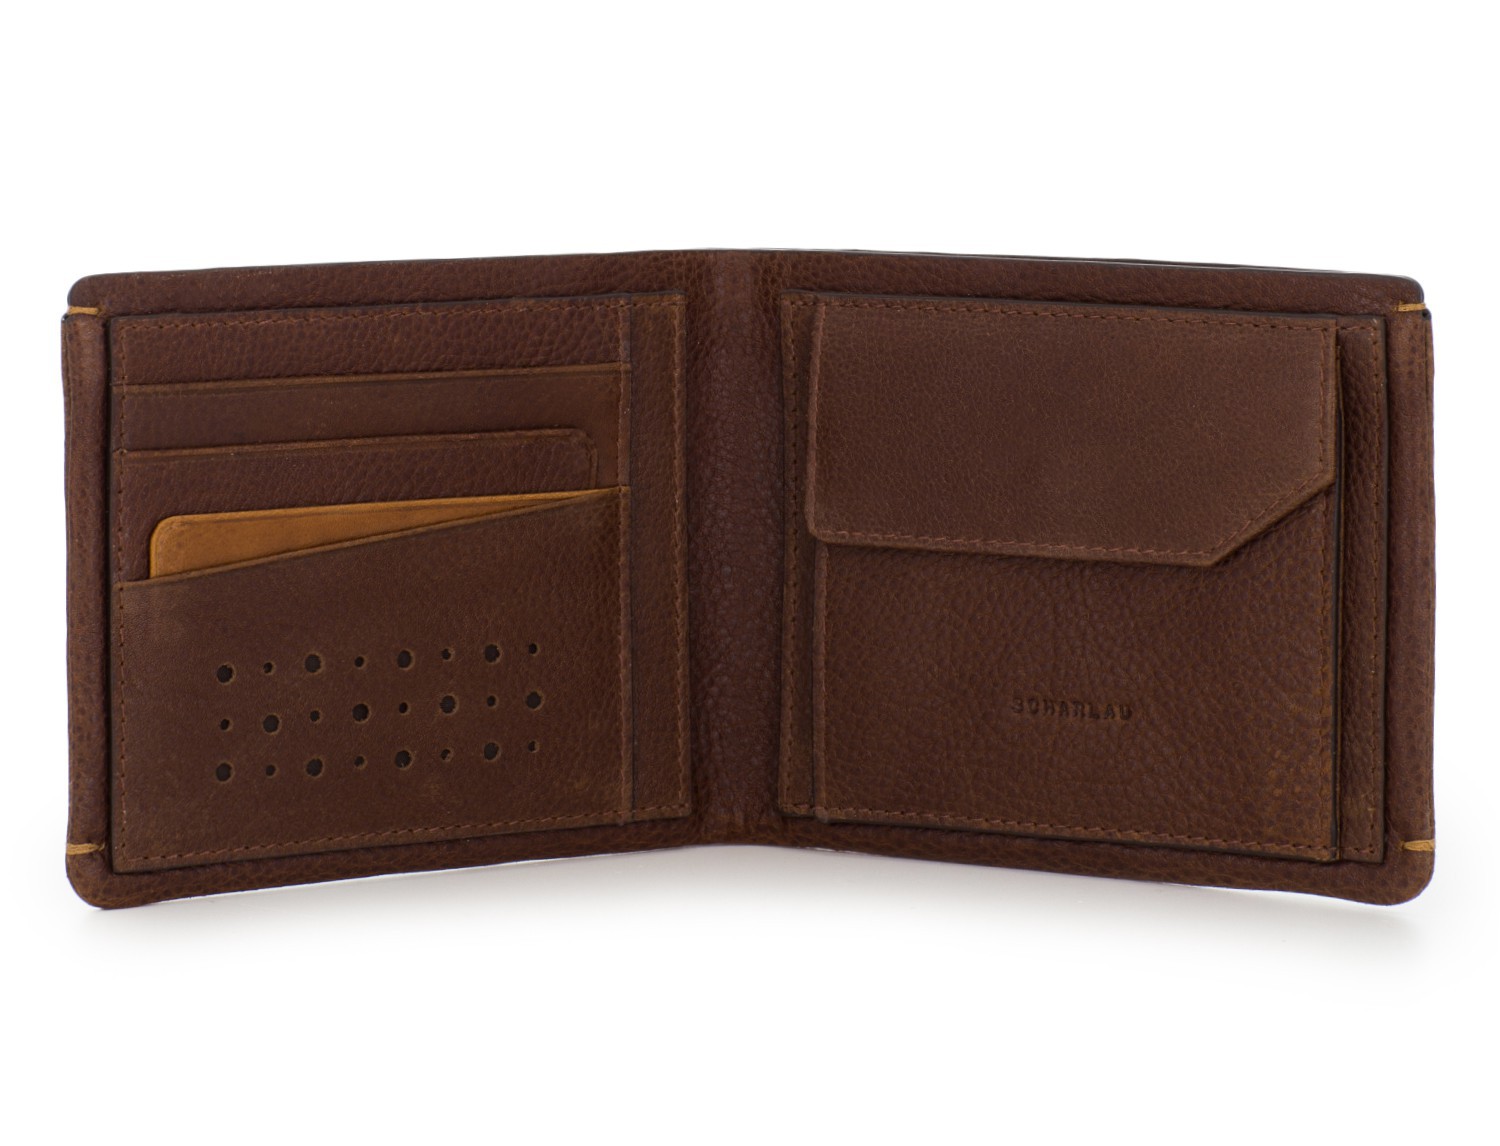 leather Wallet with coin pocket brown inside